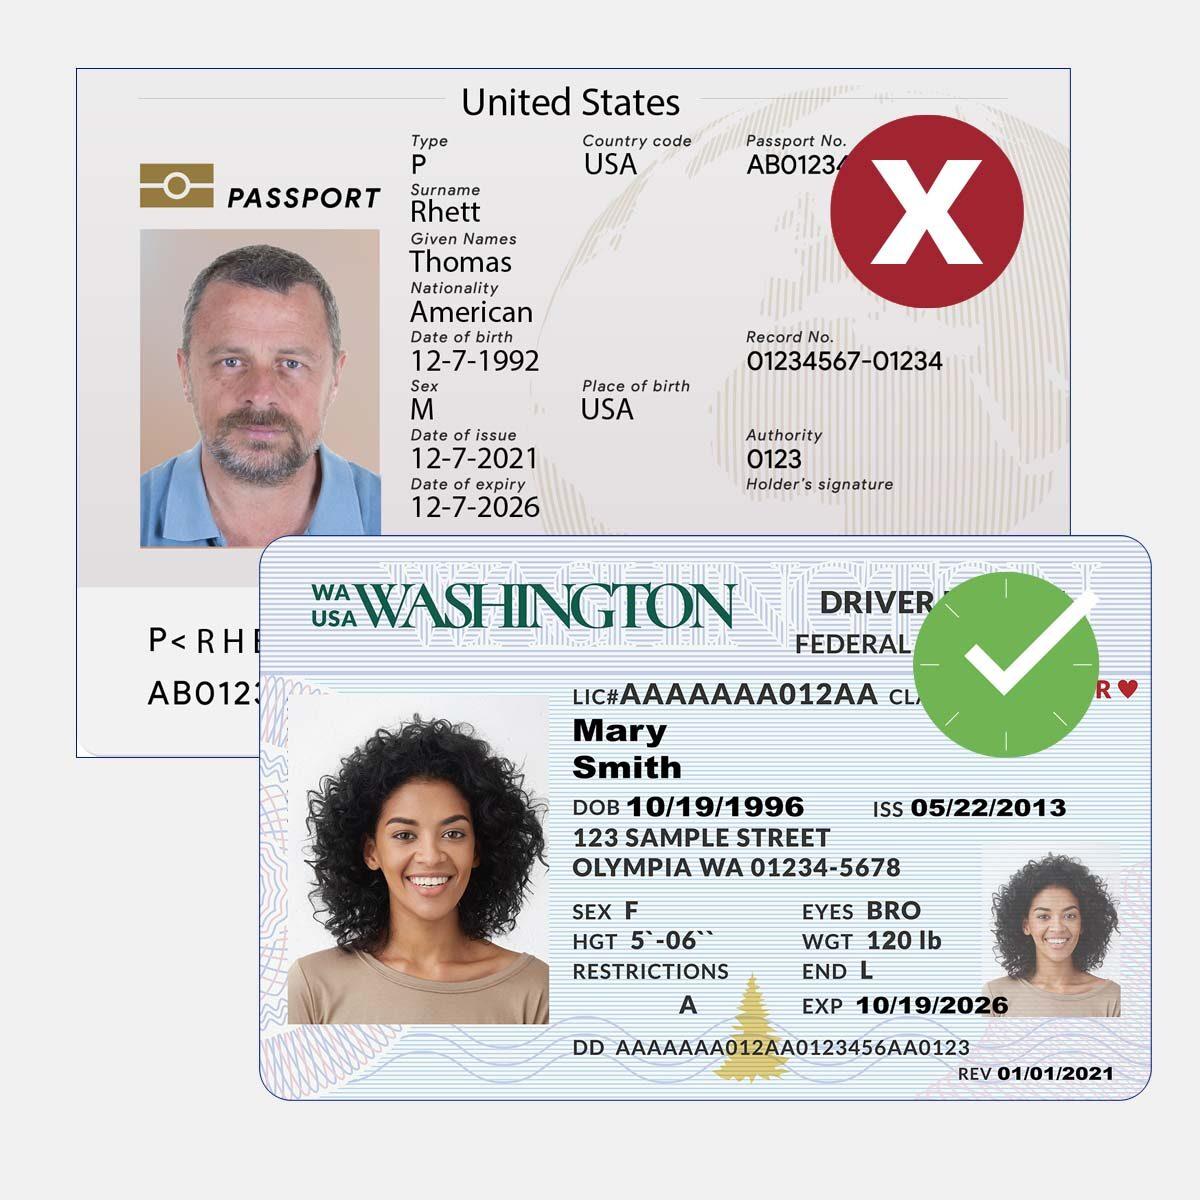 Eliminate fake IDs or fake government documents with advanced fraud detection algorithms.